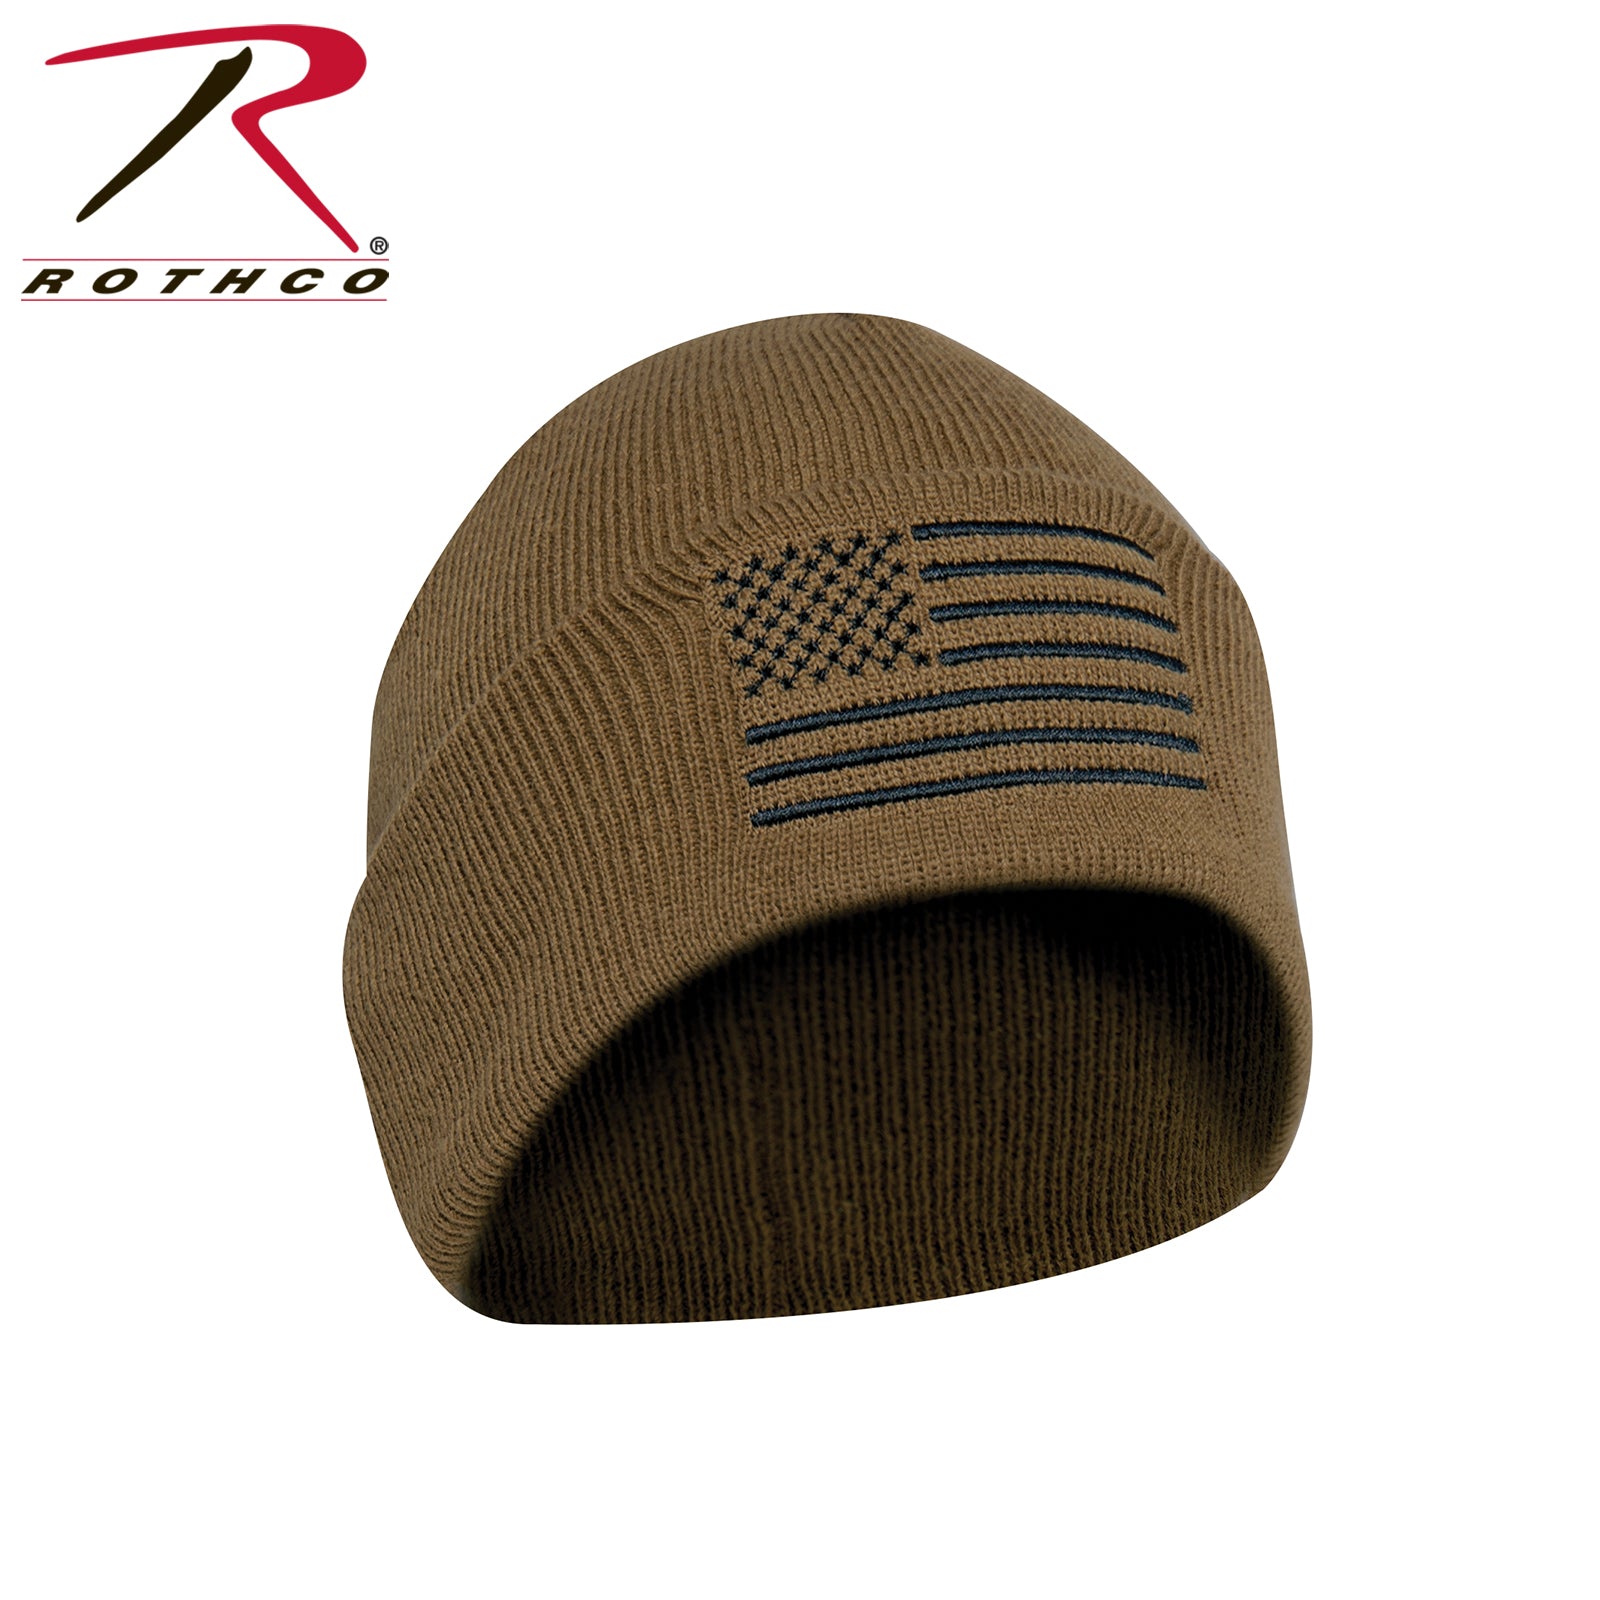 Rothco US Flag Embroidered Fine Knit Watch Cap